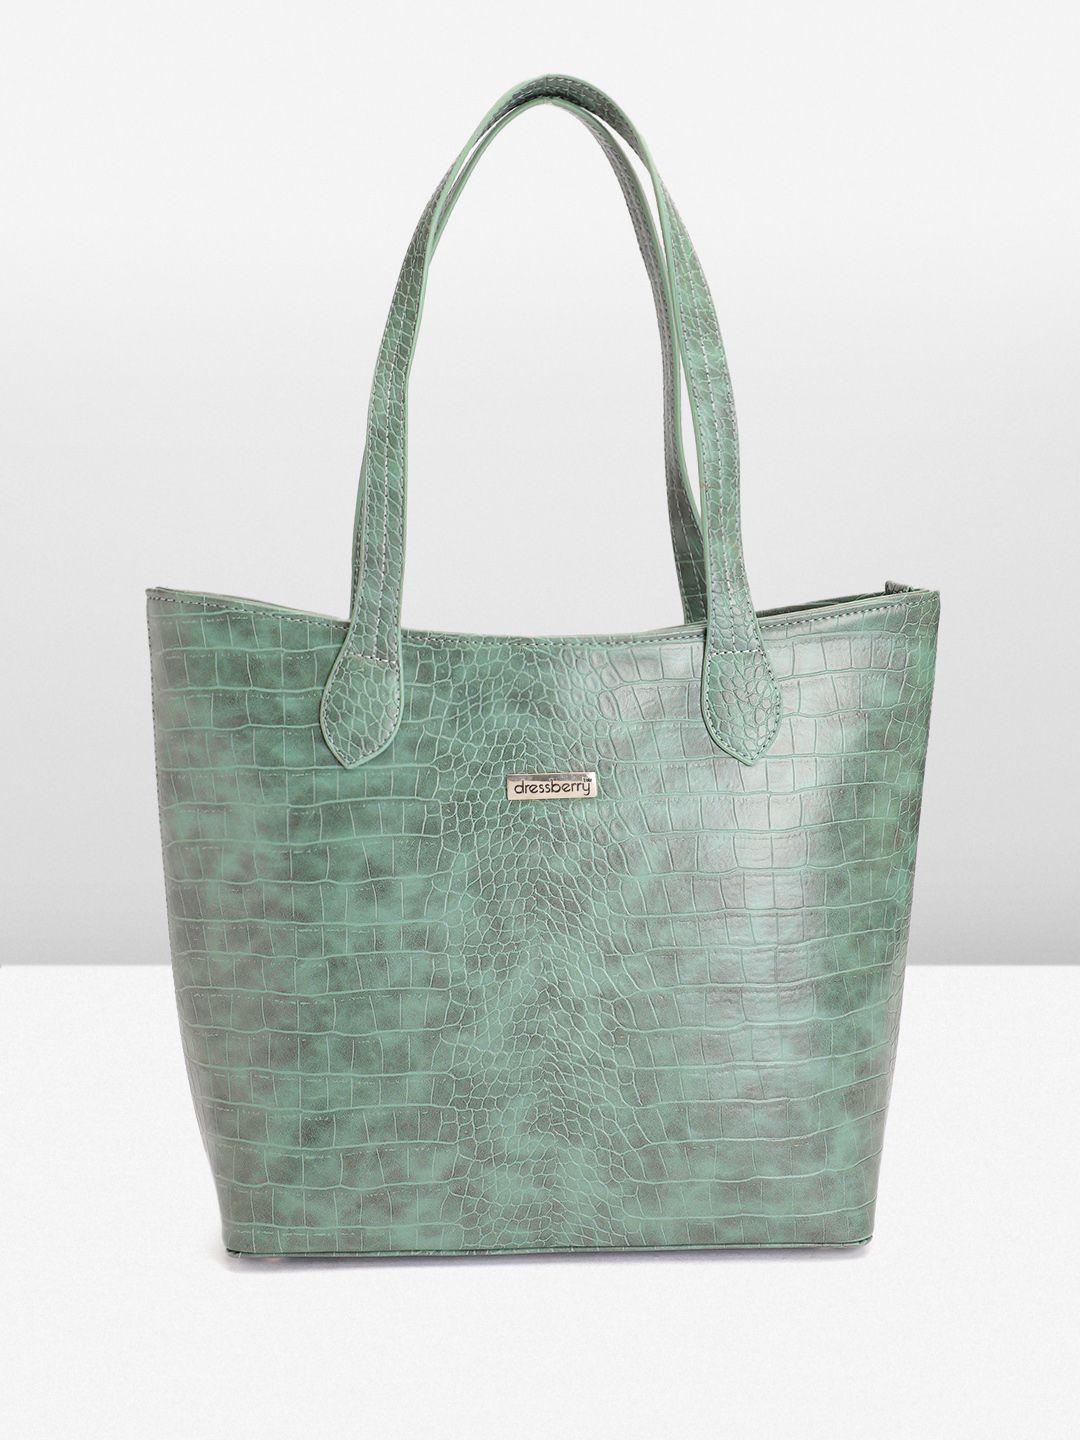 dressberry textured structured tote bag